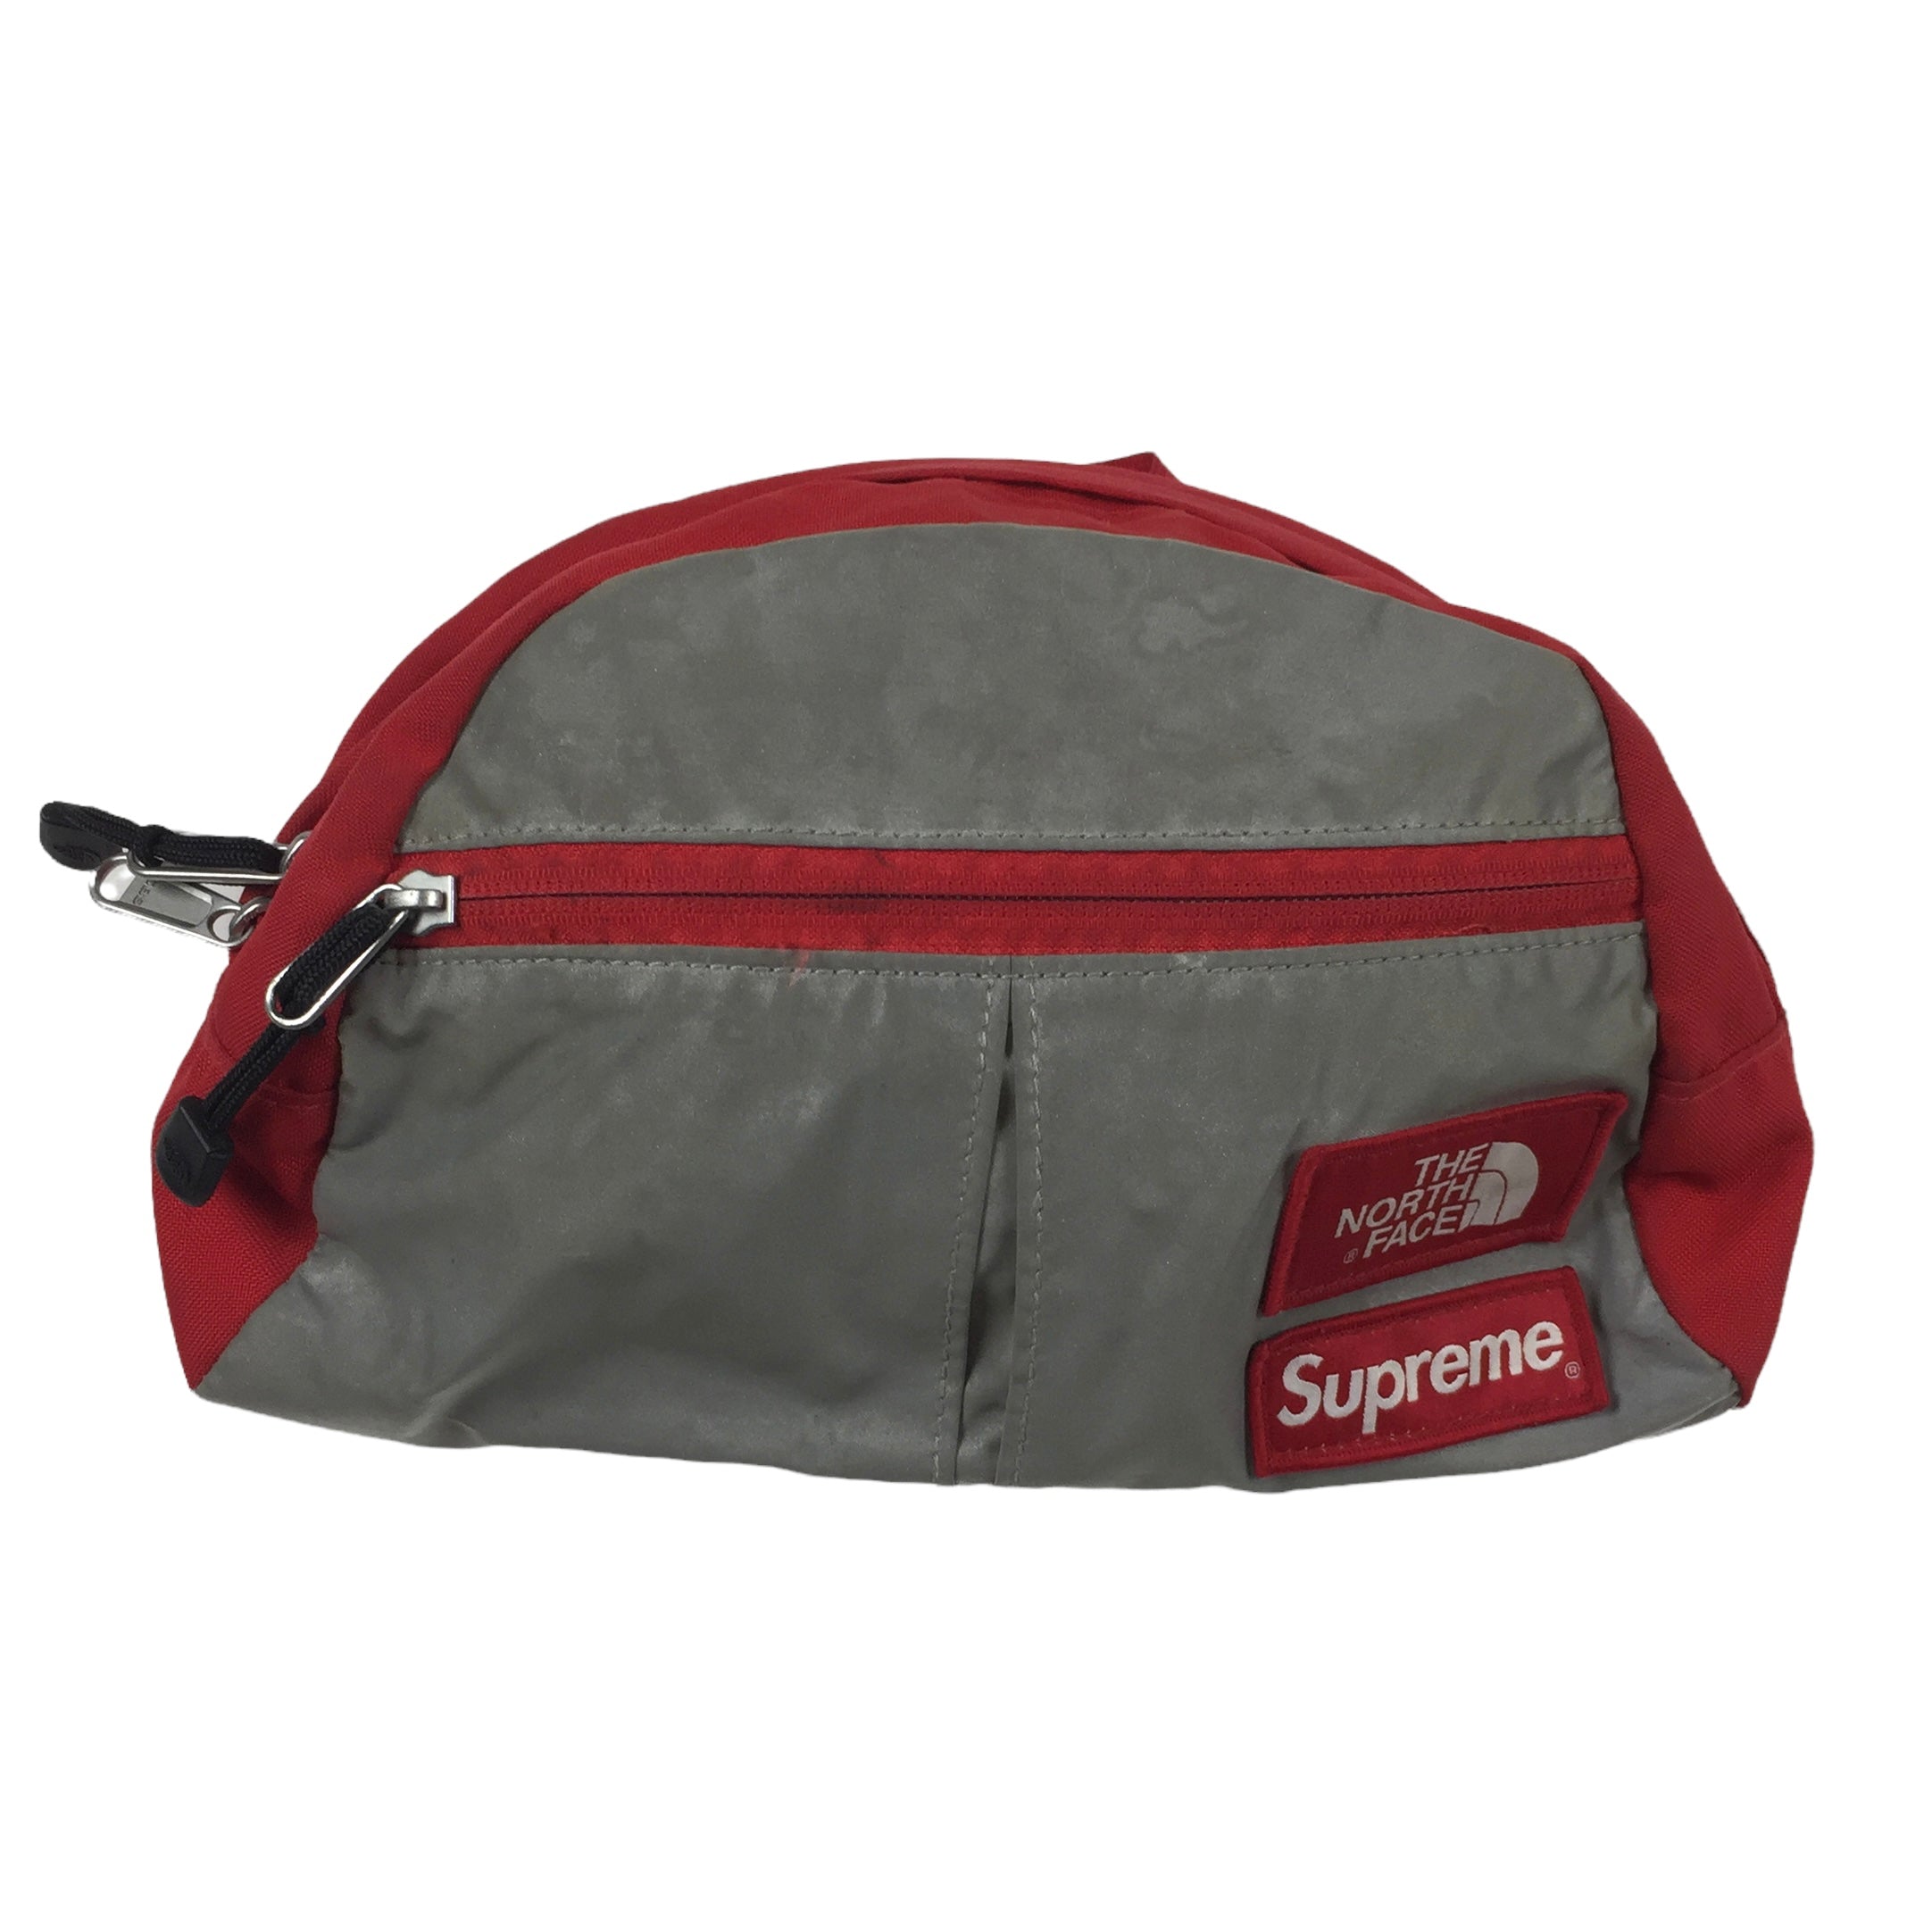 2013 Supreme x The North Face 3M Red Waist Bag